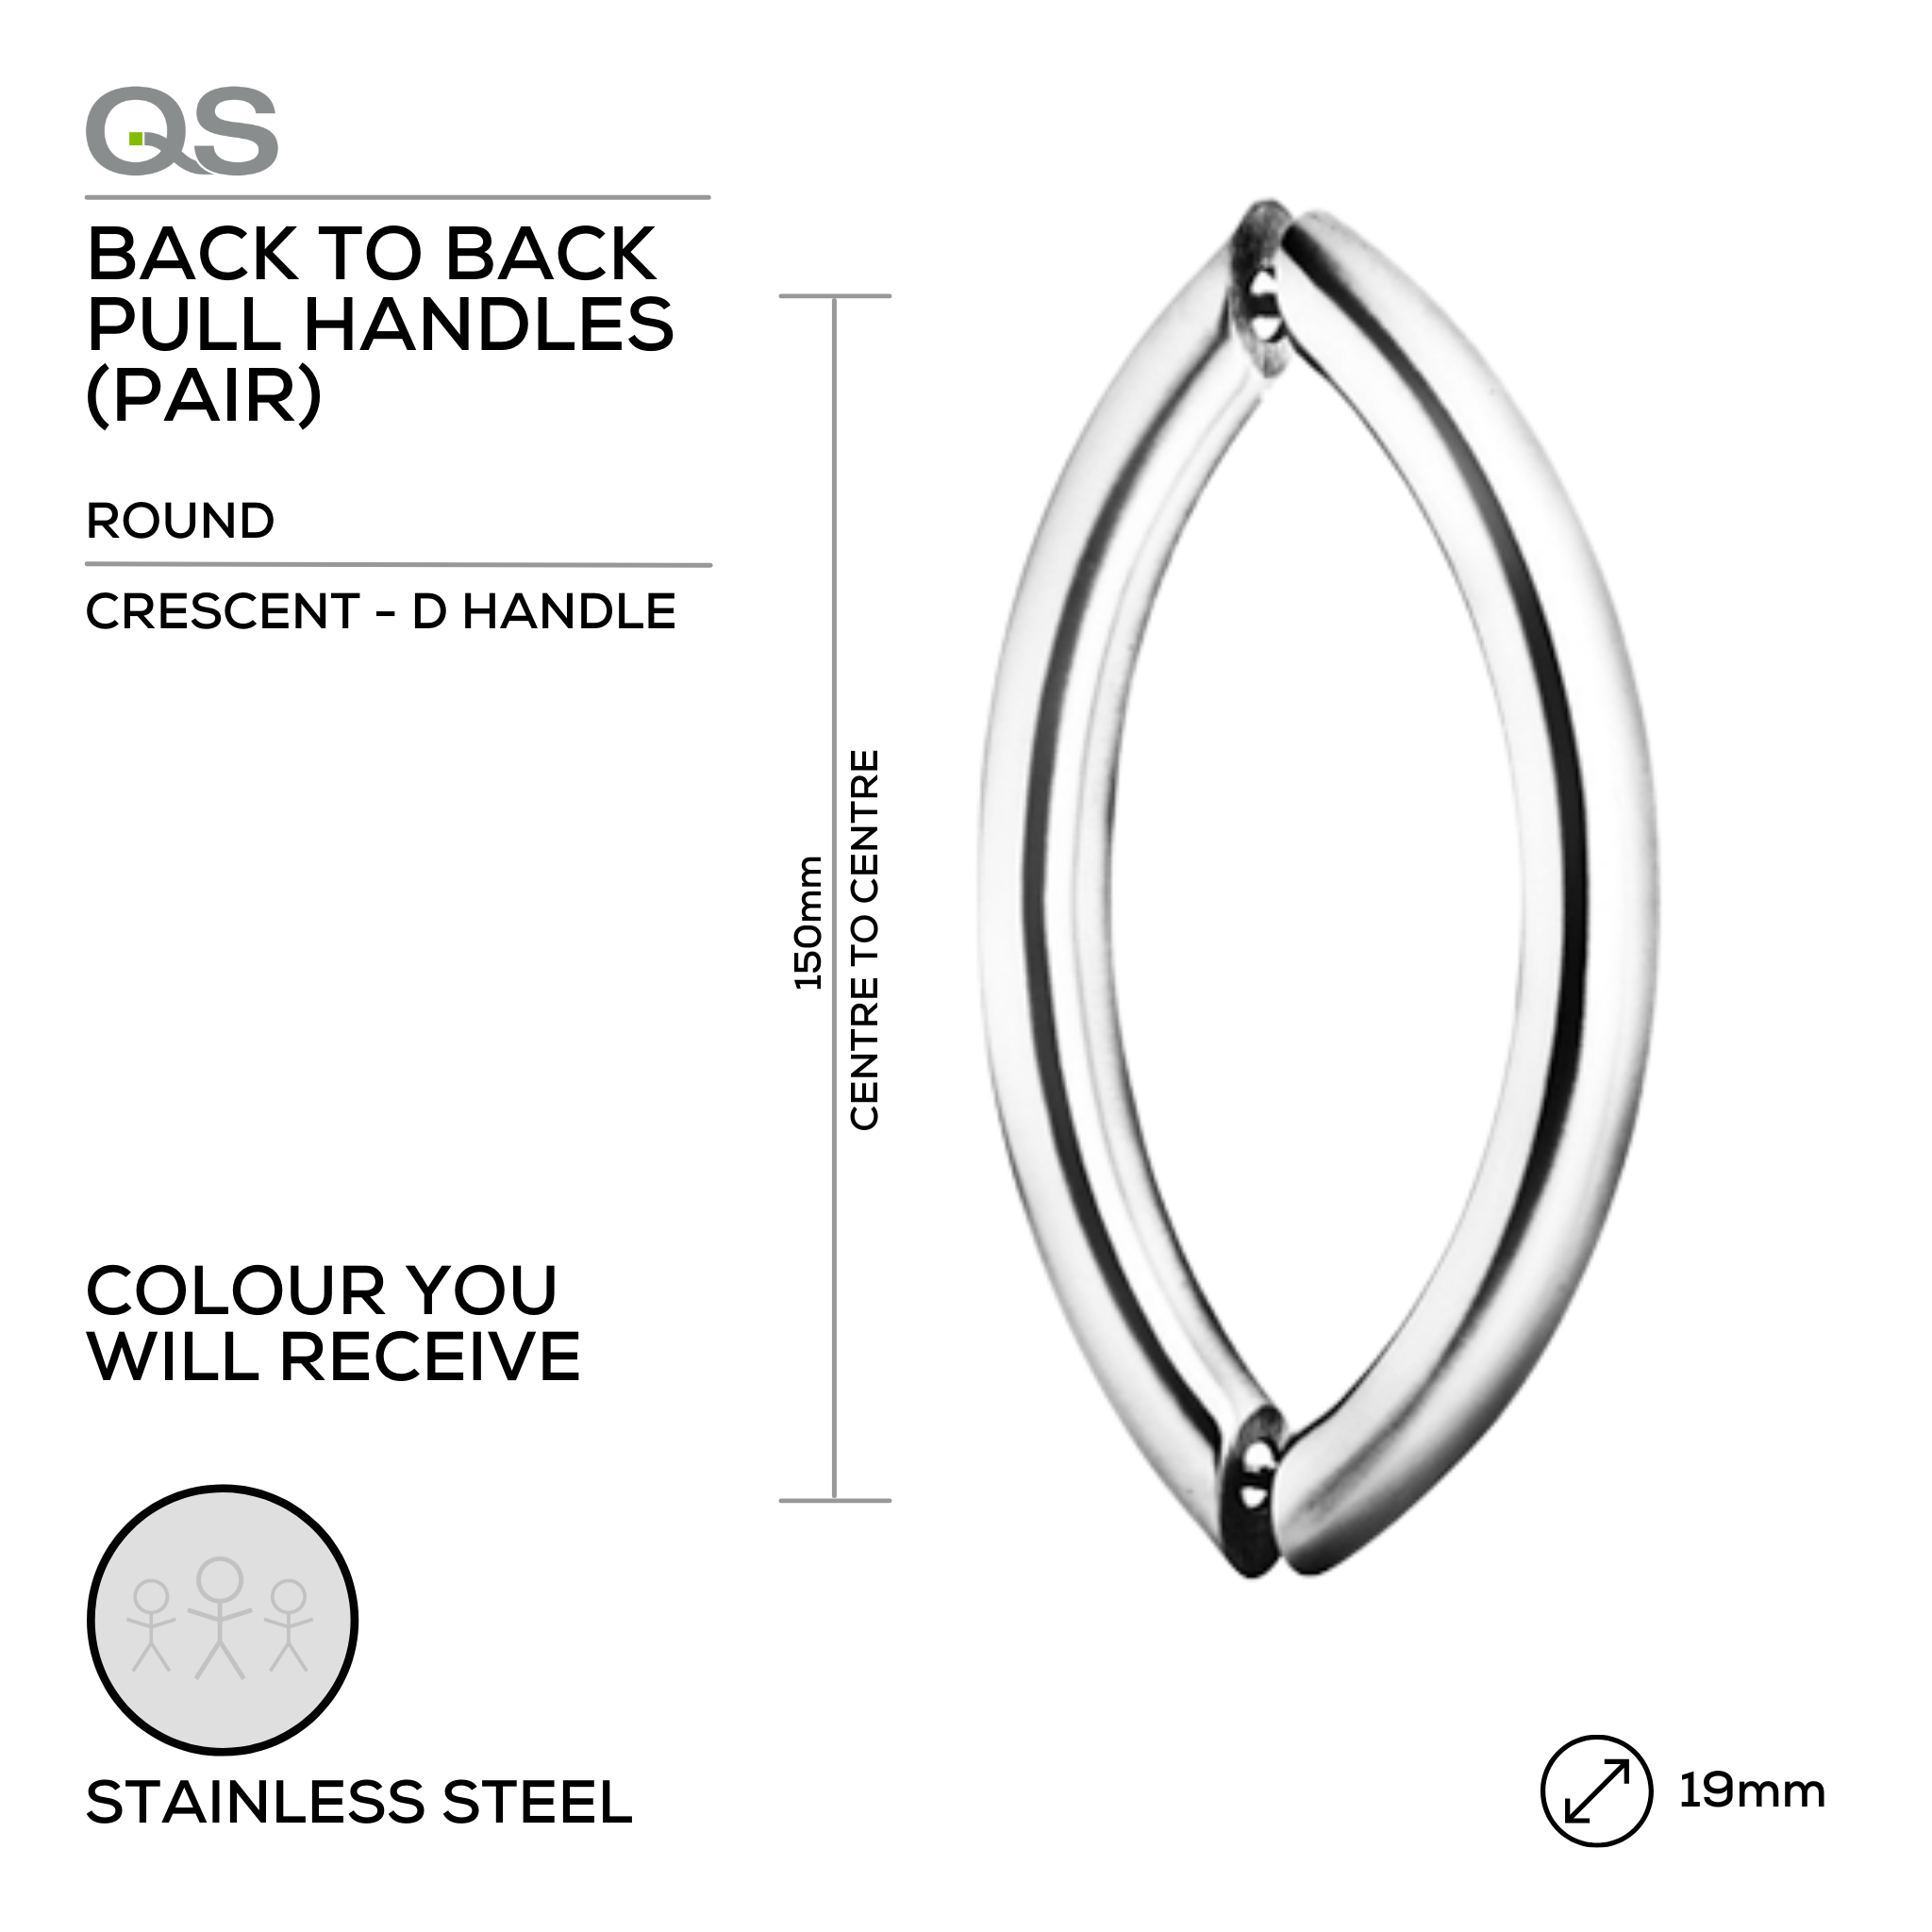 QS2205 Crescent D Handle, Pull Handle, Round, D Handle, BTB, 19mm (Ø) x 150mm (l), Stainless Steel, QS